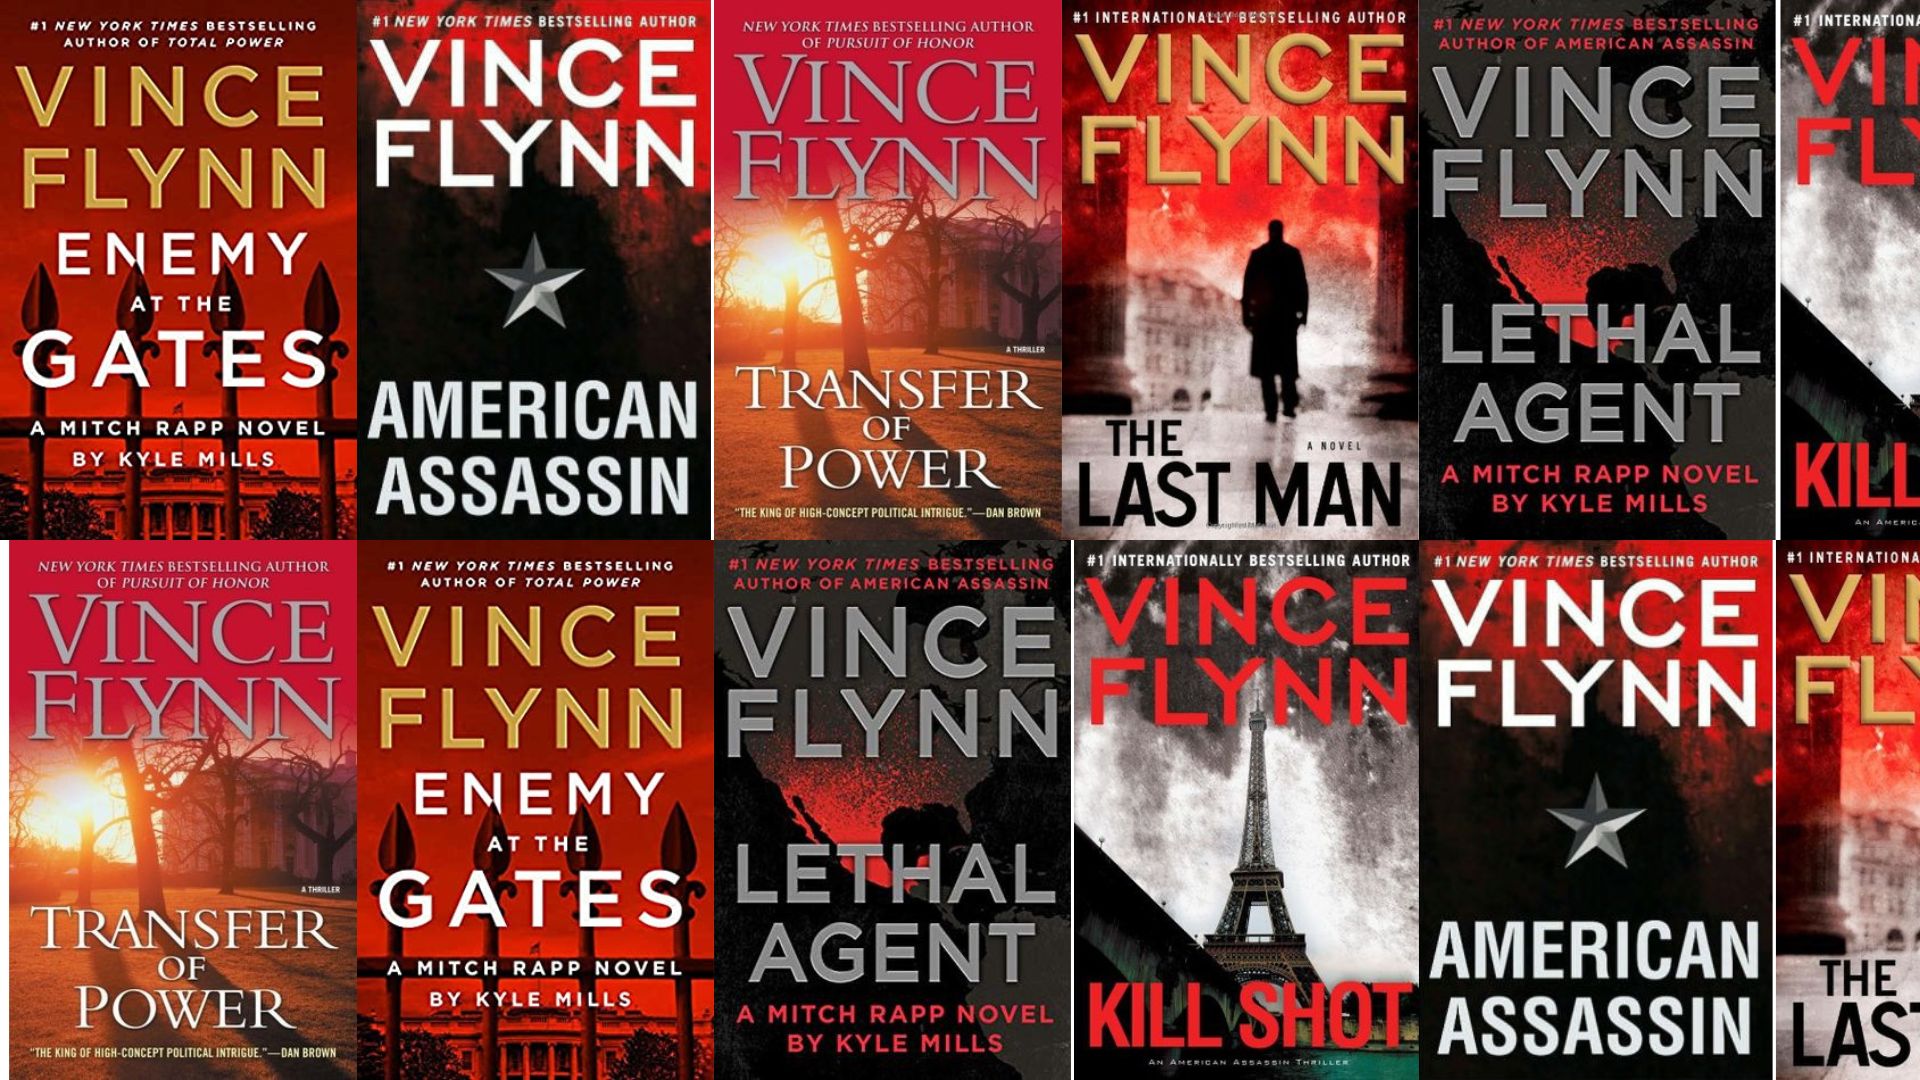 How To Read Vince Flynn Books In Order